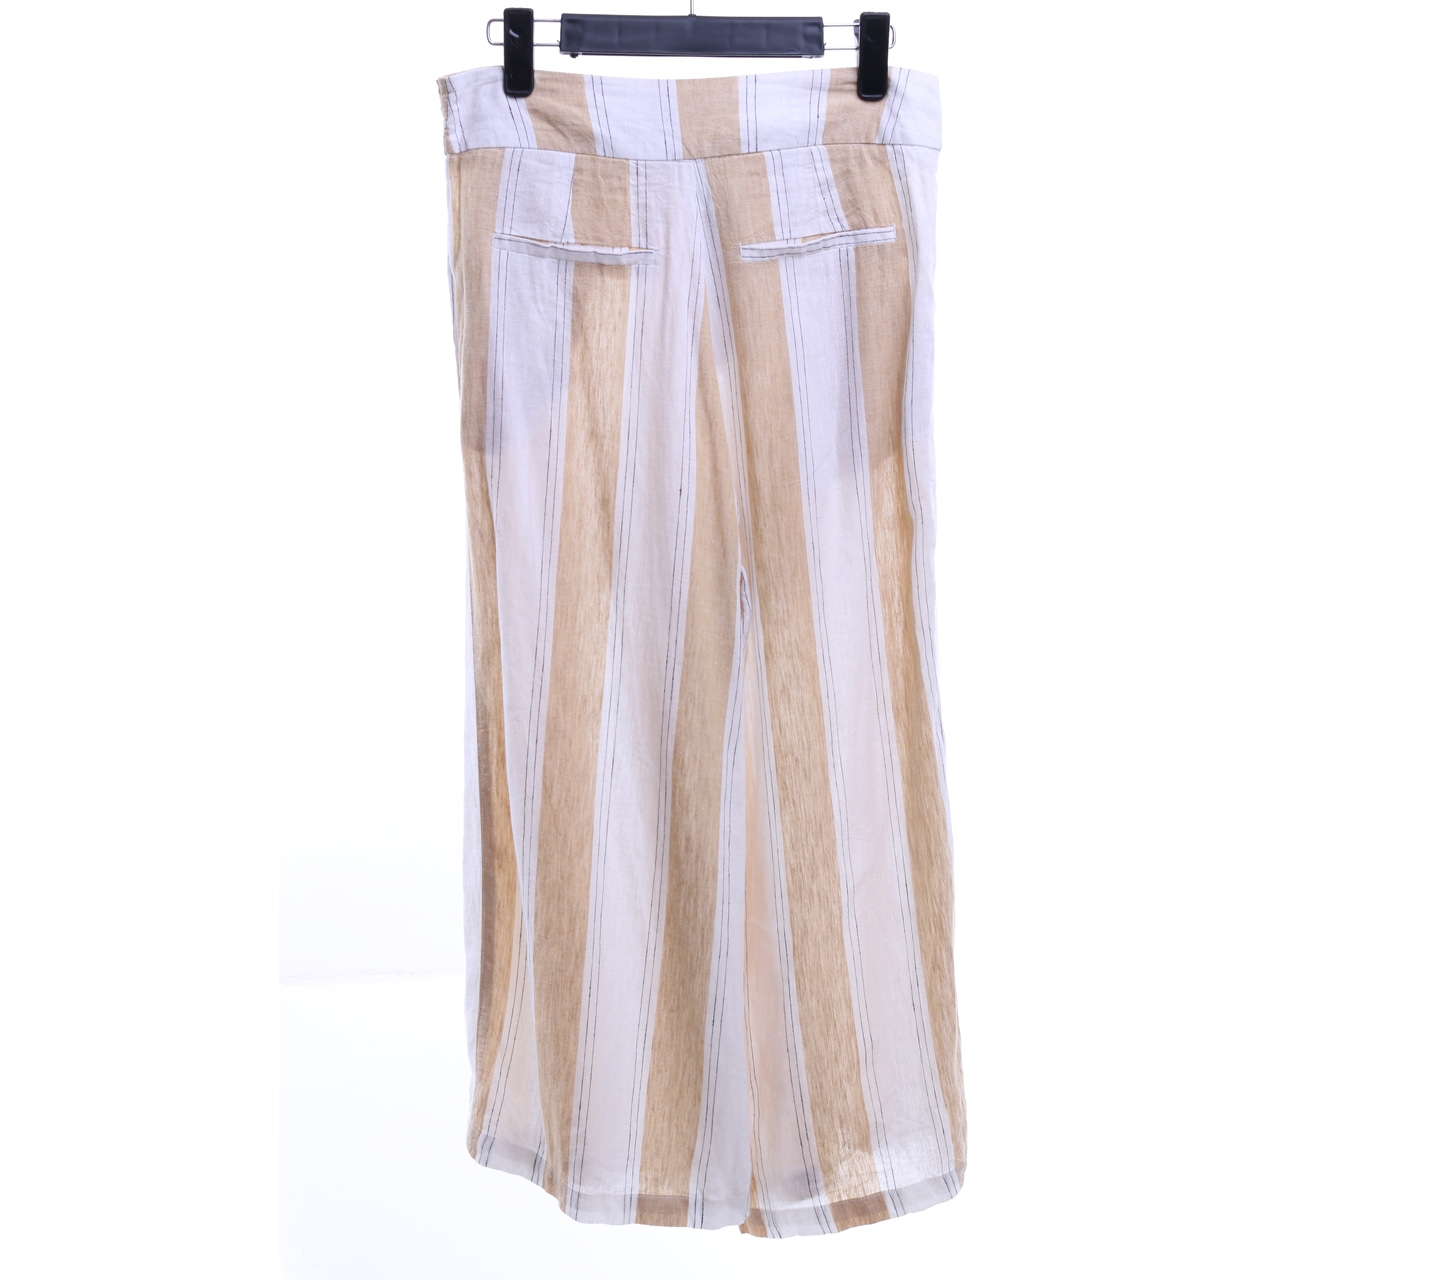 Glassons White And Brown Striped Culottes Long Pants